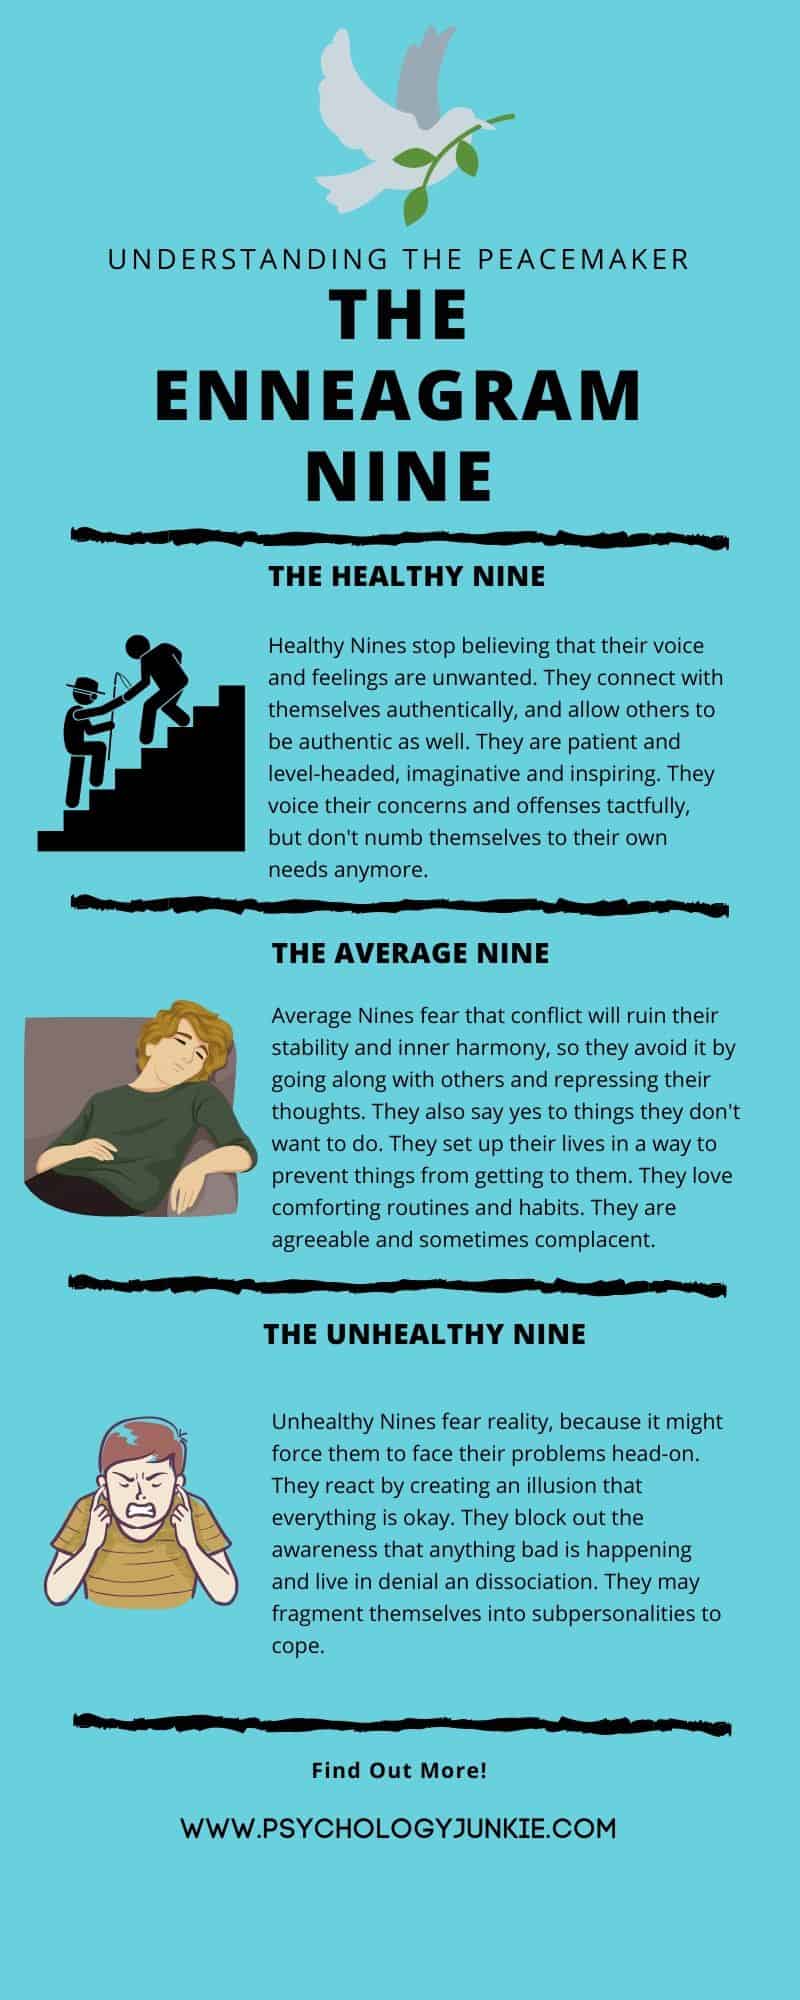 A visual look at the average, healthy, and unhealthy levels of the #enneagram nine. #enneatype #nine